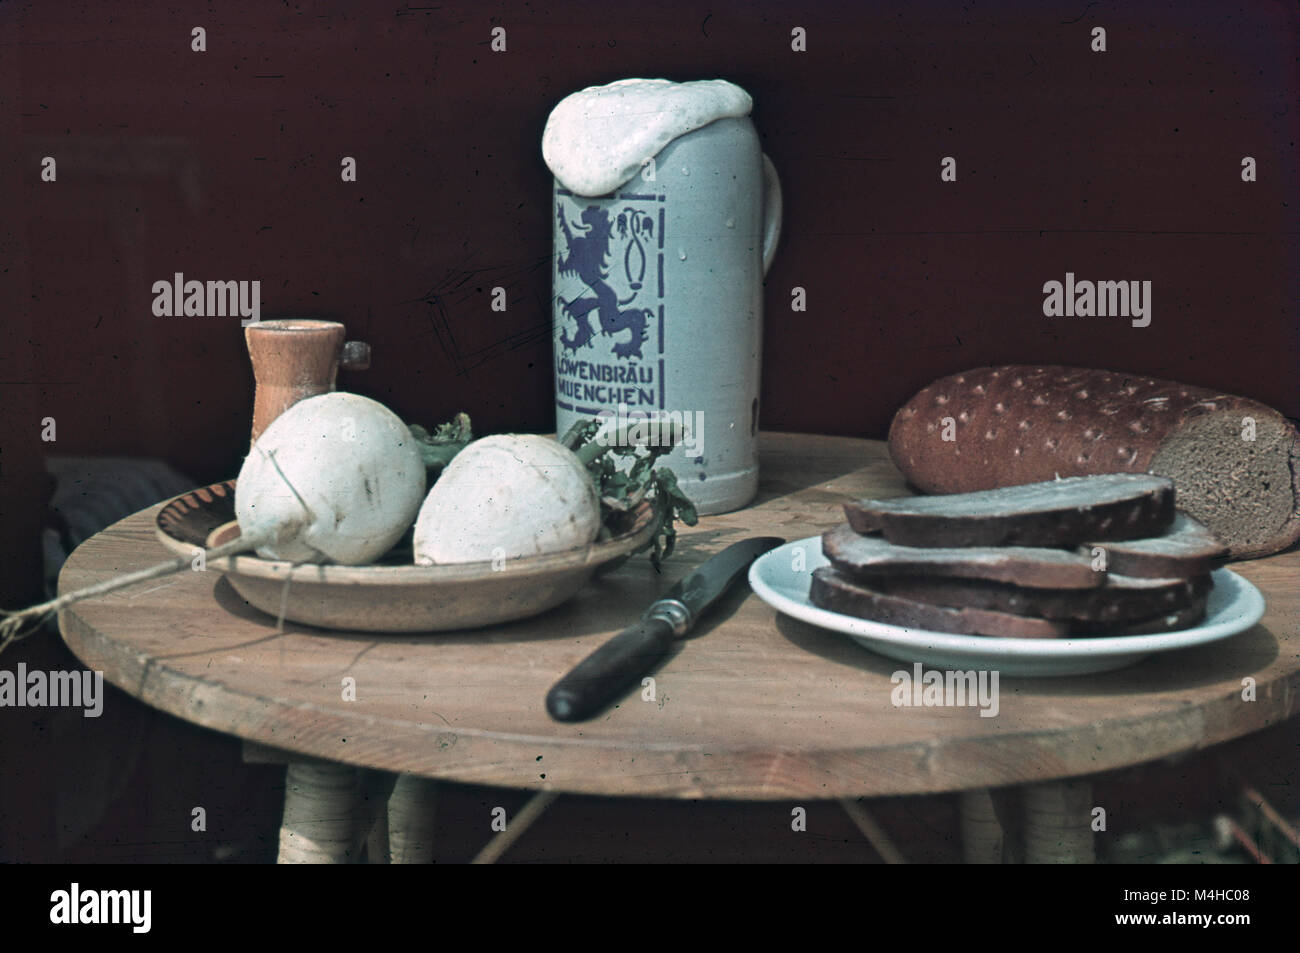 Bavarian Brotzeit (savory snack) with butter, bread and radish on a wooden table. Stock Photo